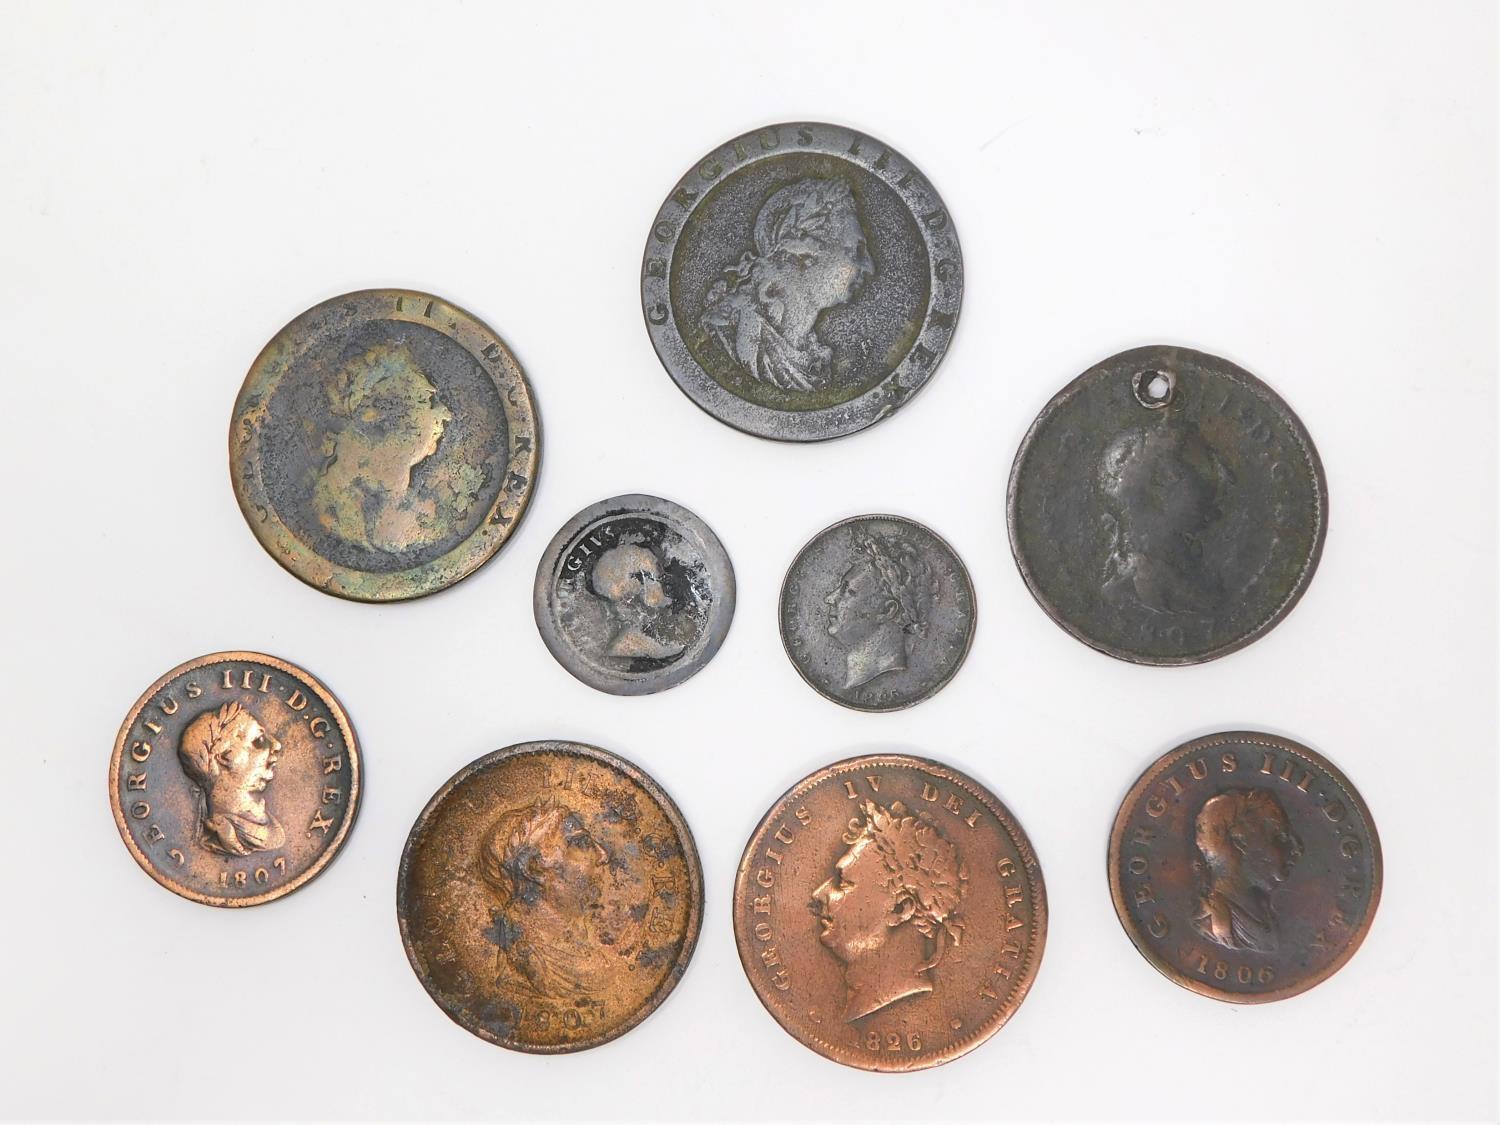 A collection of nine 19th century George III and George IV coins. Including two cartwheel pennies